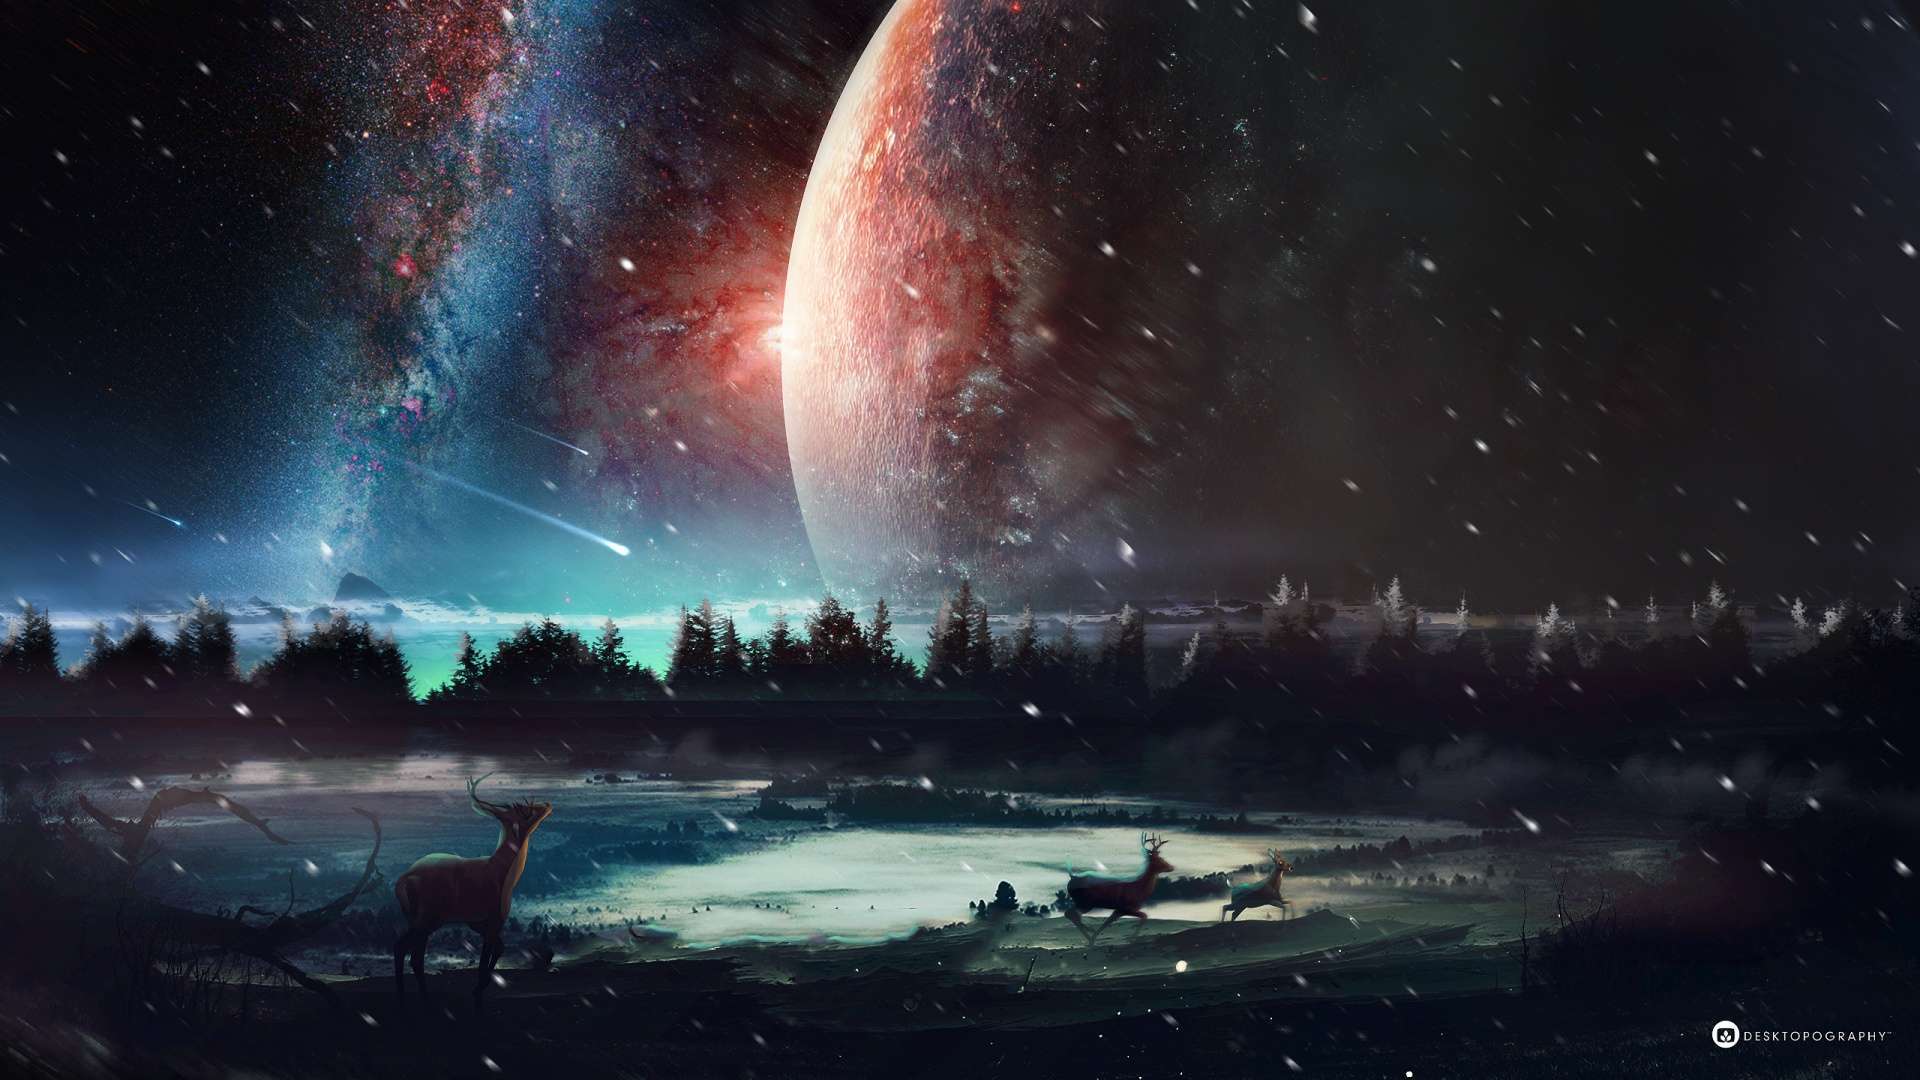 Universe Hd Wallpapers 1080P - Wallpapers High Definition